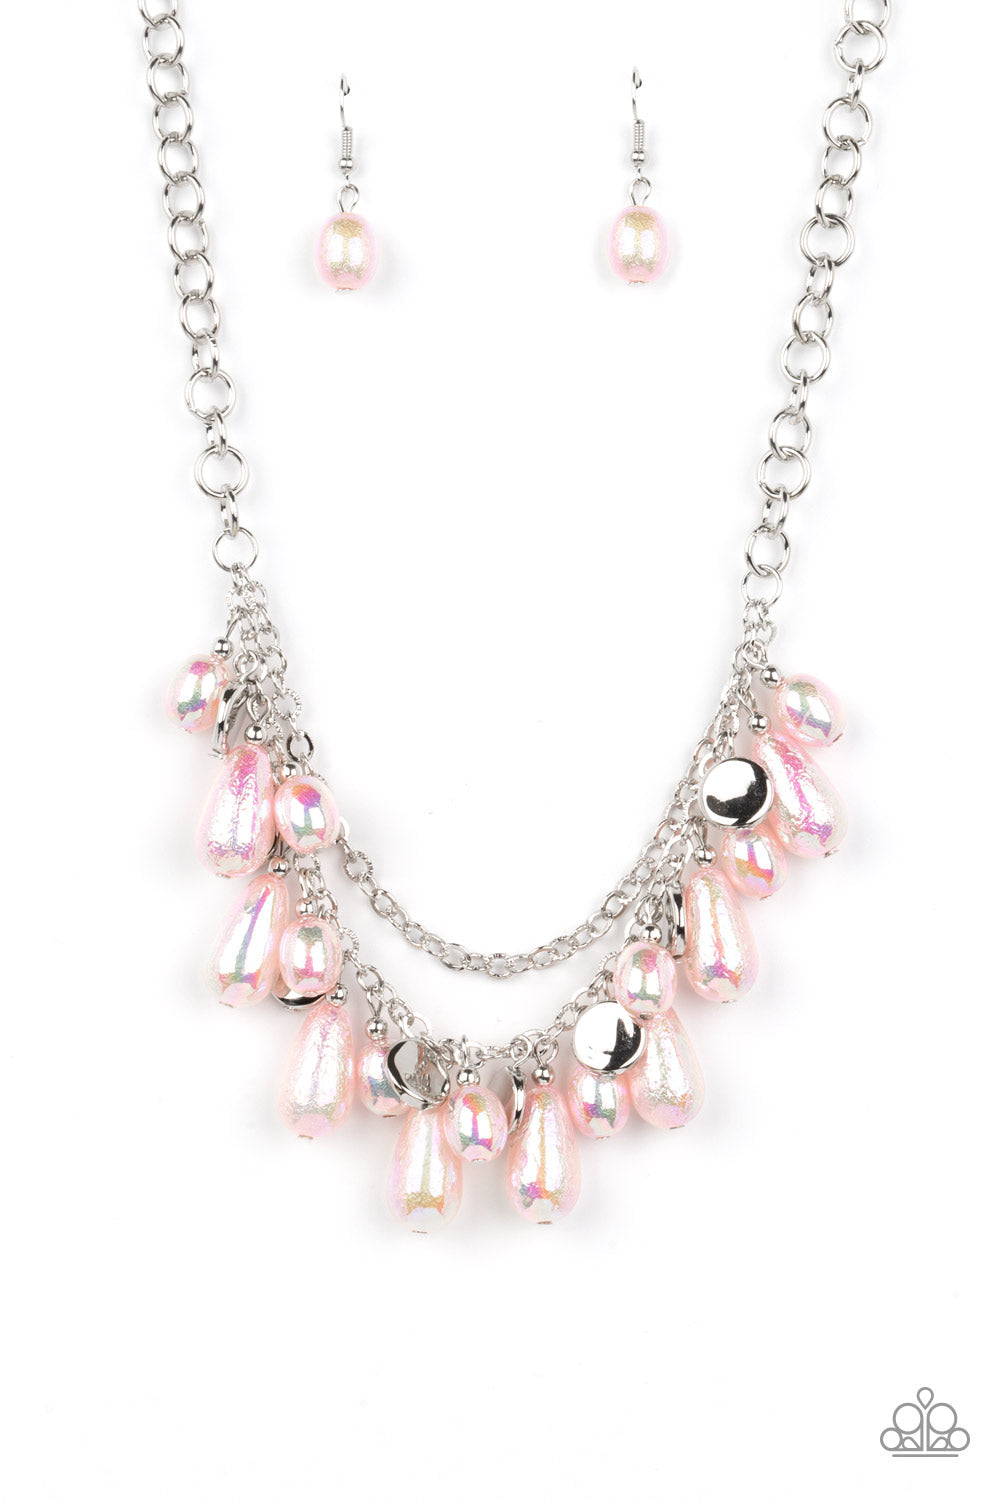 Interstellar Serenity - Pink and Silver Necklace - Paparazzi Accessories - Featuring an iridescent foil-like finish, pearly Gossamer Pink oval and teardrop beads alternate with silver discs below the collar. A dainty silver chain is draped above the stellar beading, resulting in enchanting layers. Features an adjustable clasp closure.